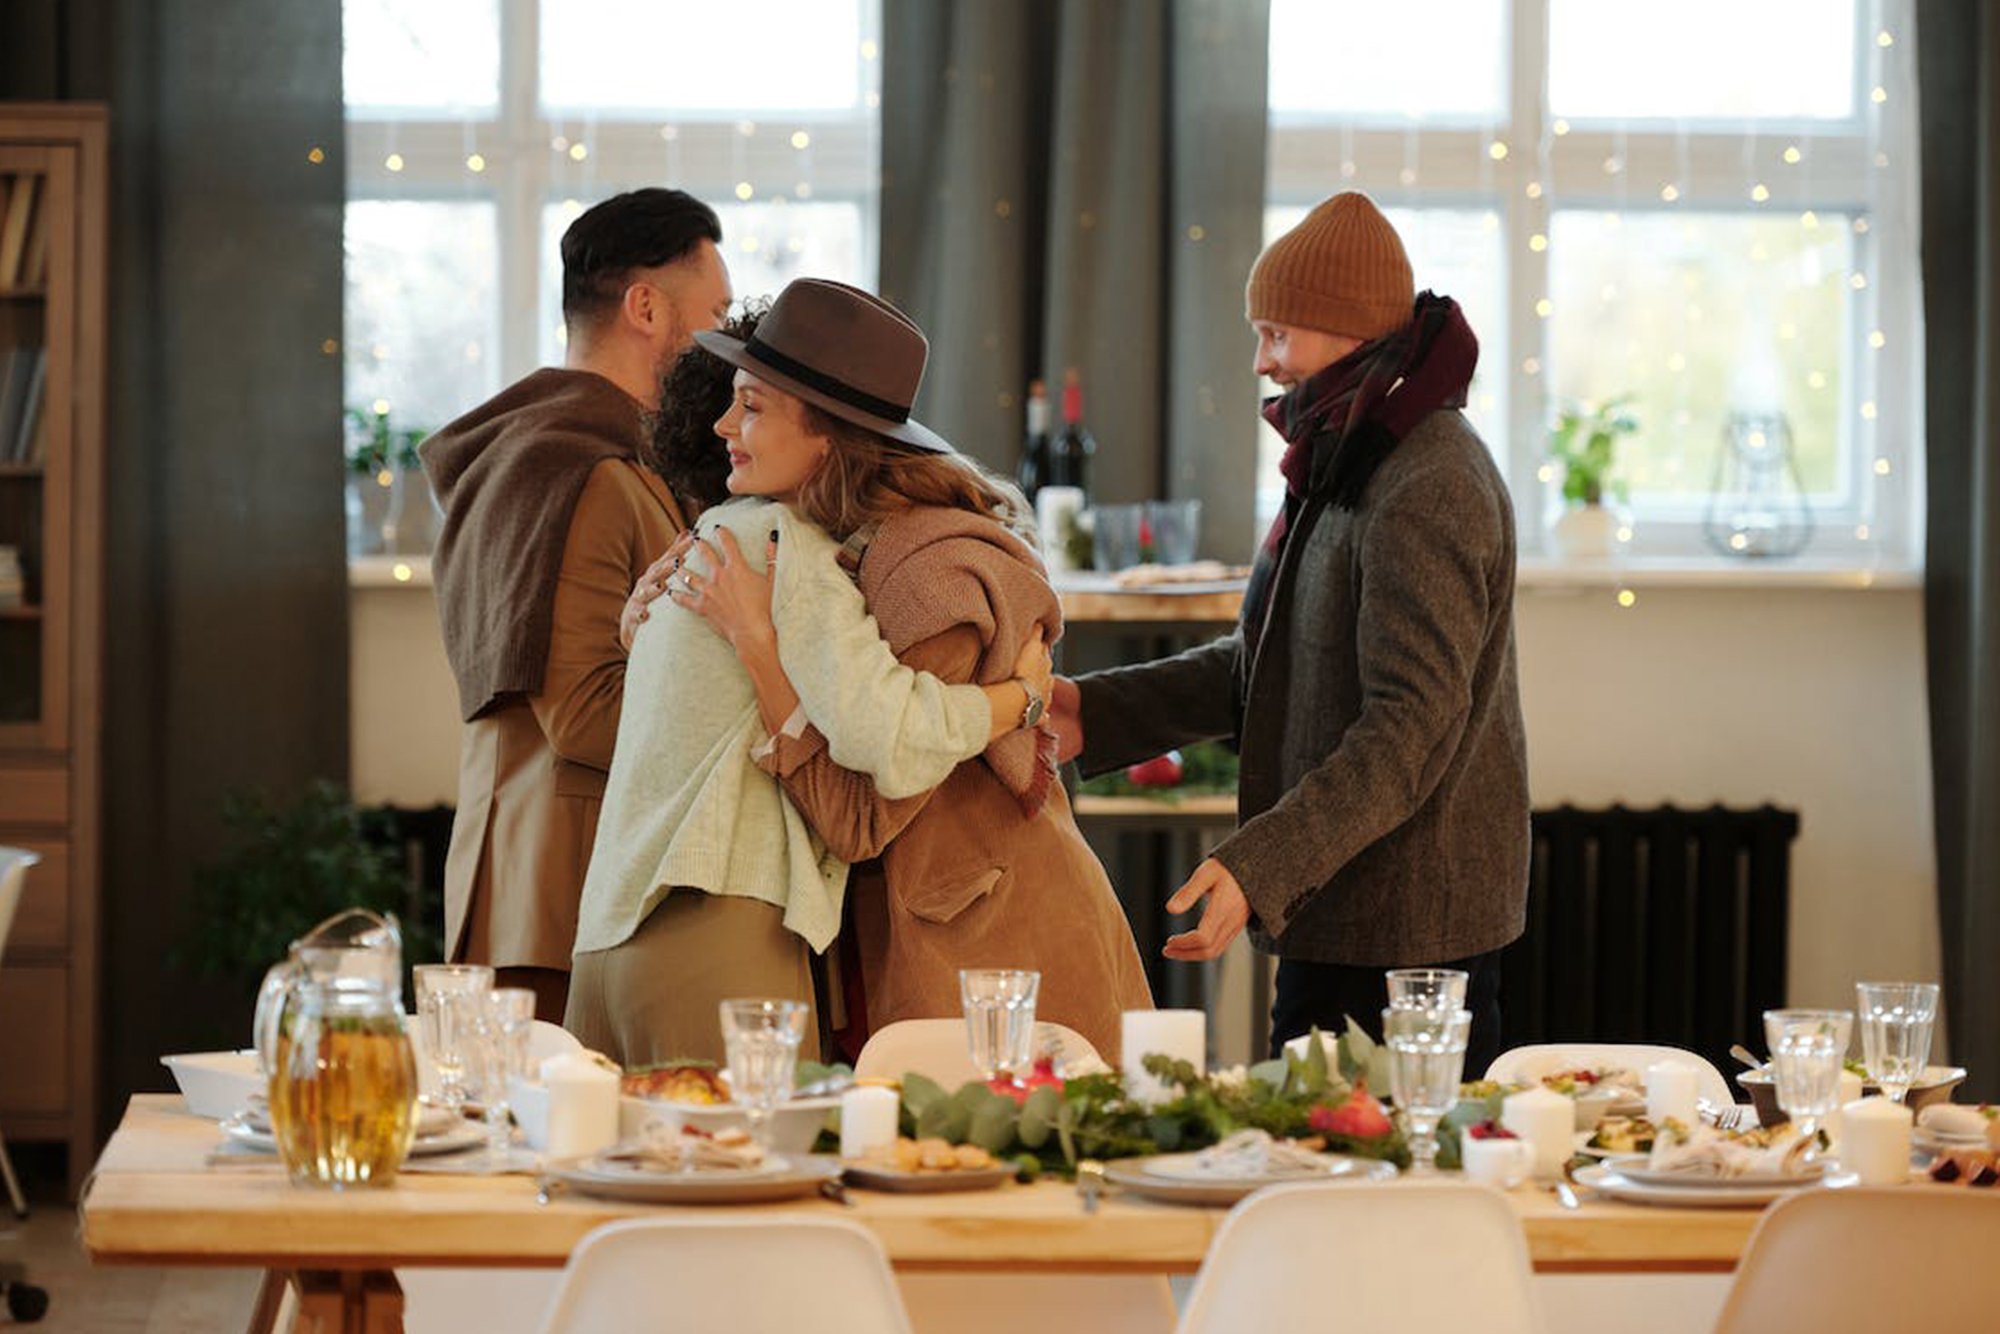 Four people embracing each other with hugs and handshakes around the dinner table at a holiday party